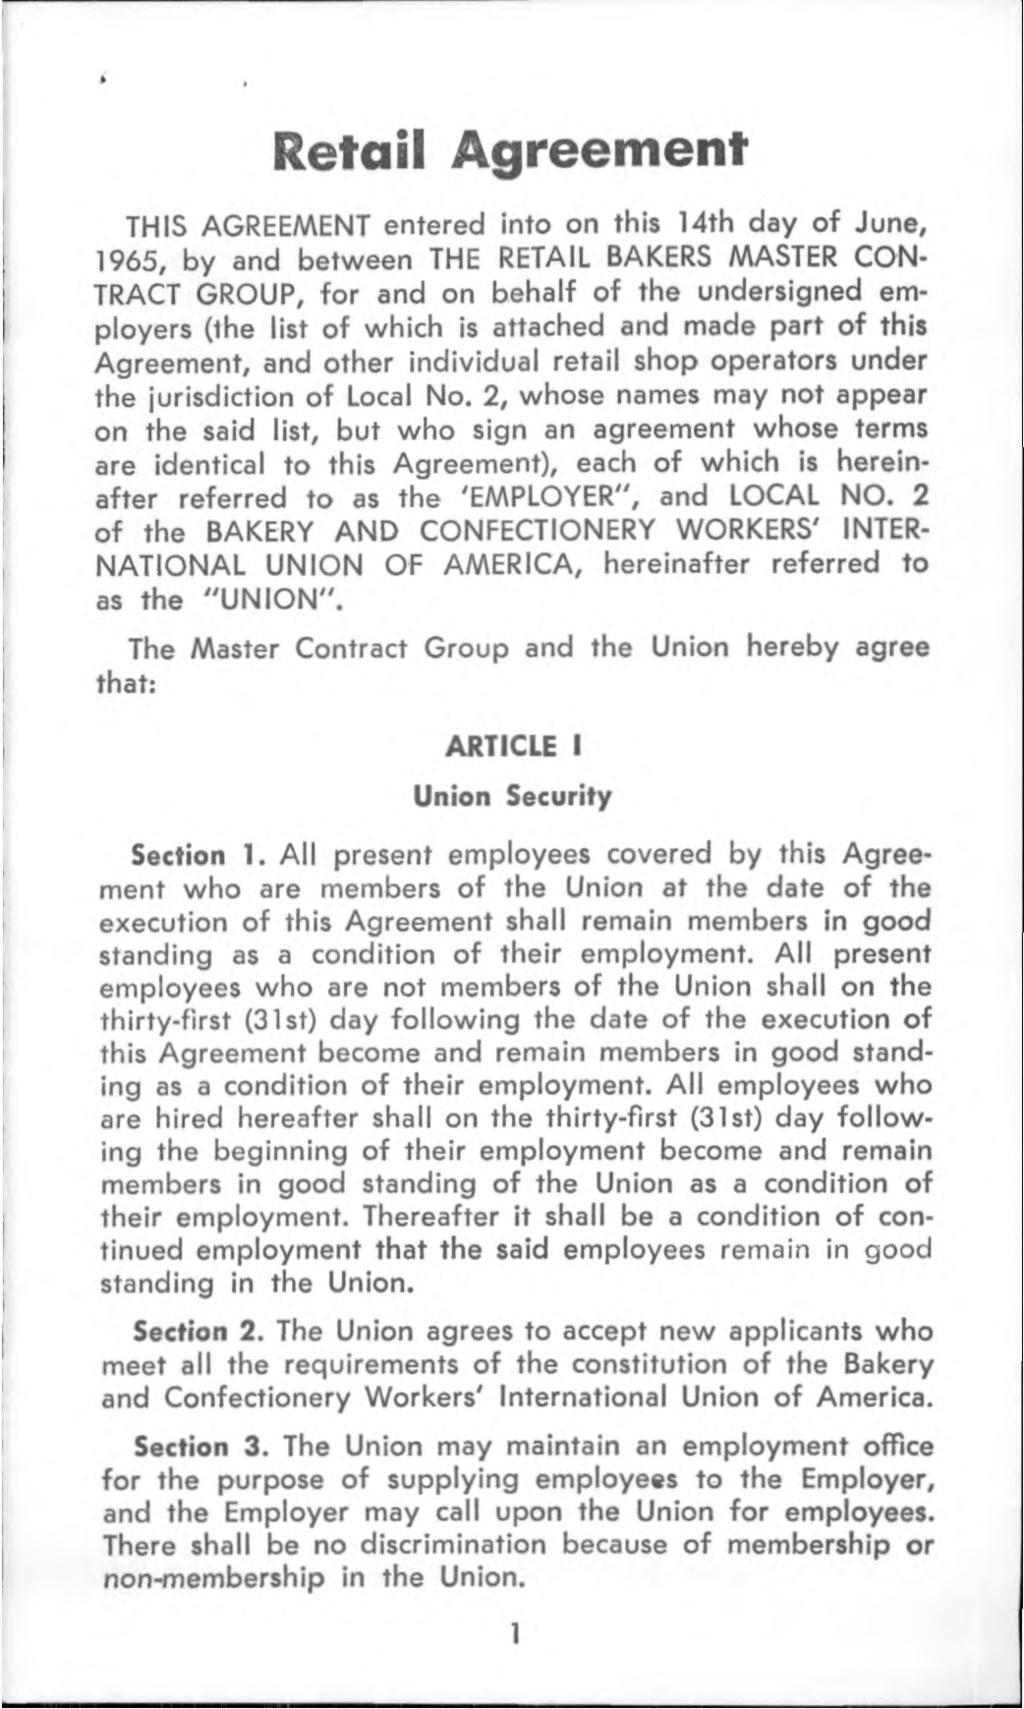 R e ta il A g r e e m e n t THIS AGREEMENT entered into on this 14th day of June, 1965, by and between THE RETAIL BAKERS MASTER CON TRACT GROUP, for and on behalf of the undersigned employers (the